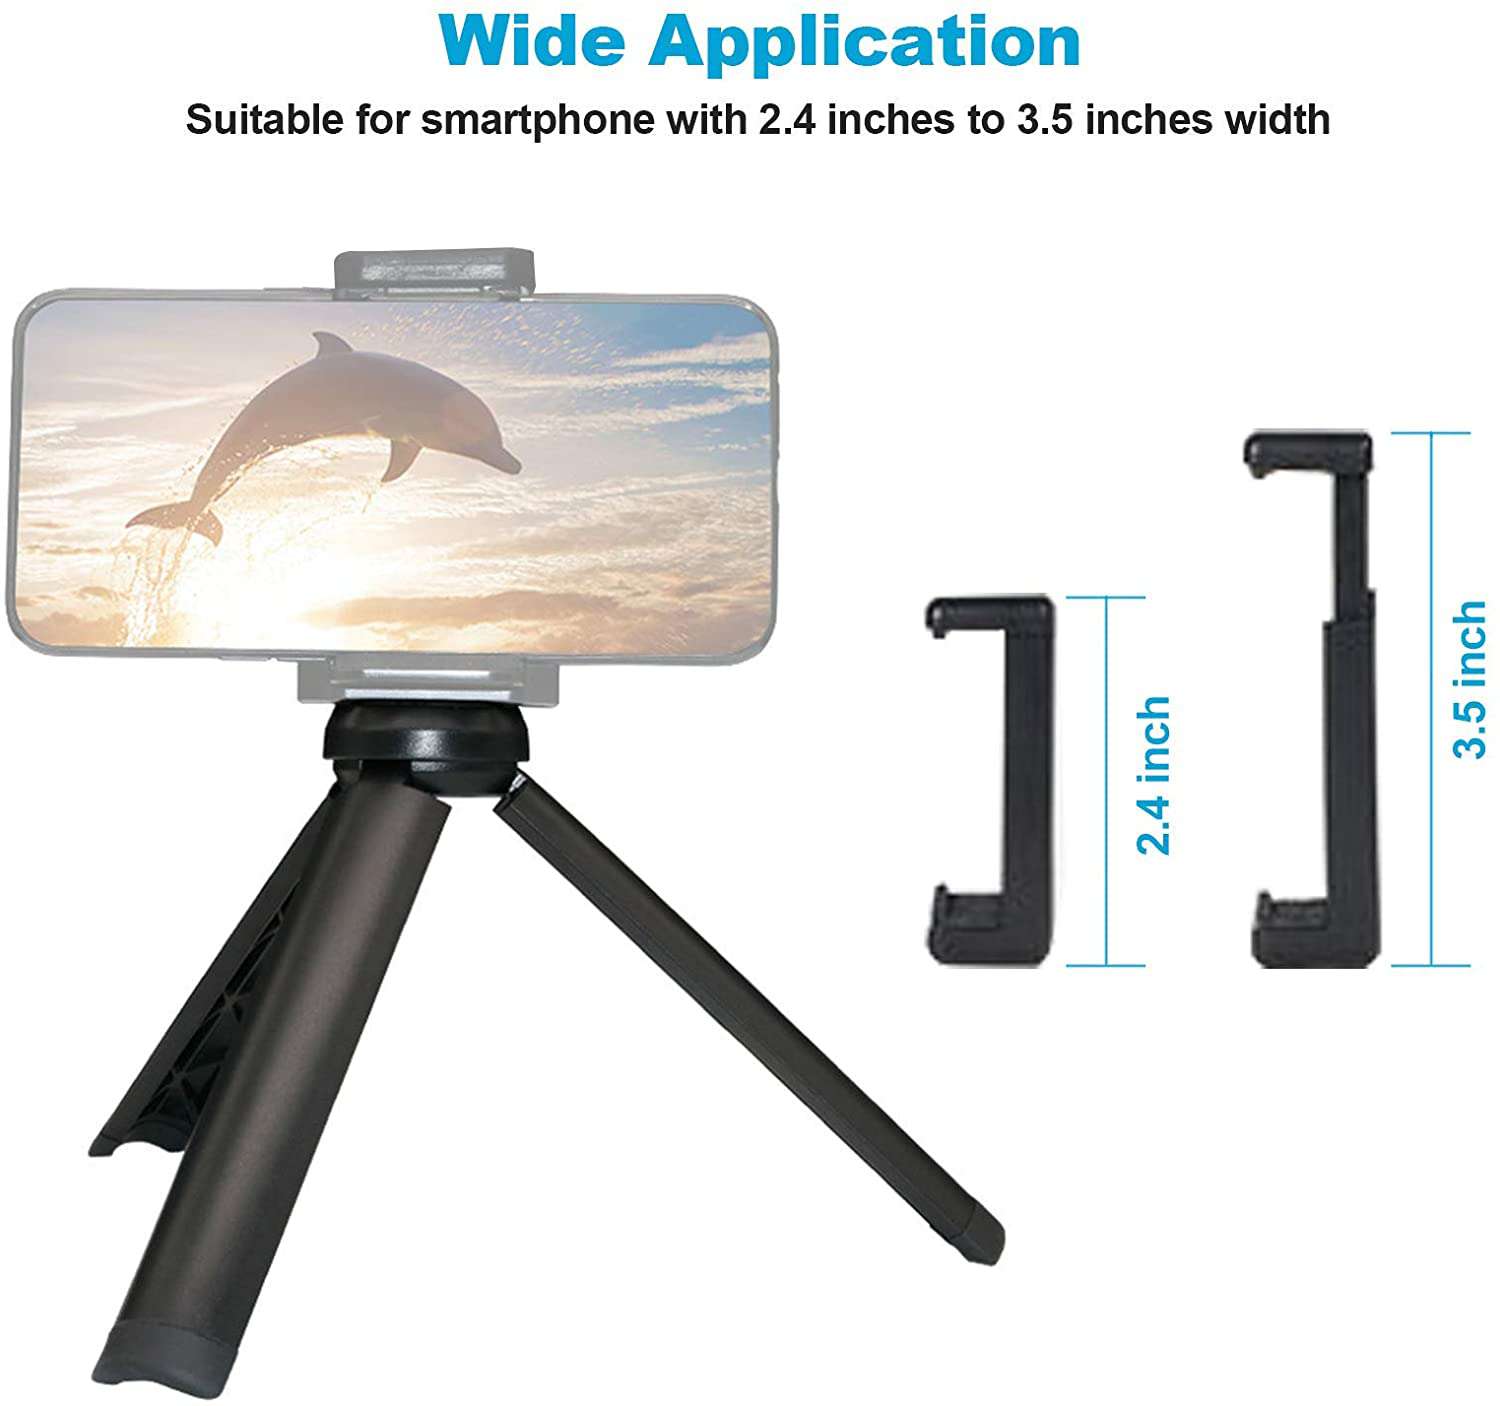 Phone clamp-on tripod adjustable for phones with a width range of 2.4'' to 3.5''.